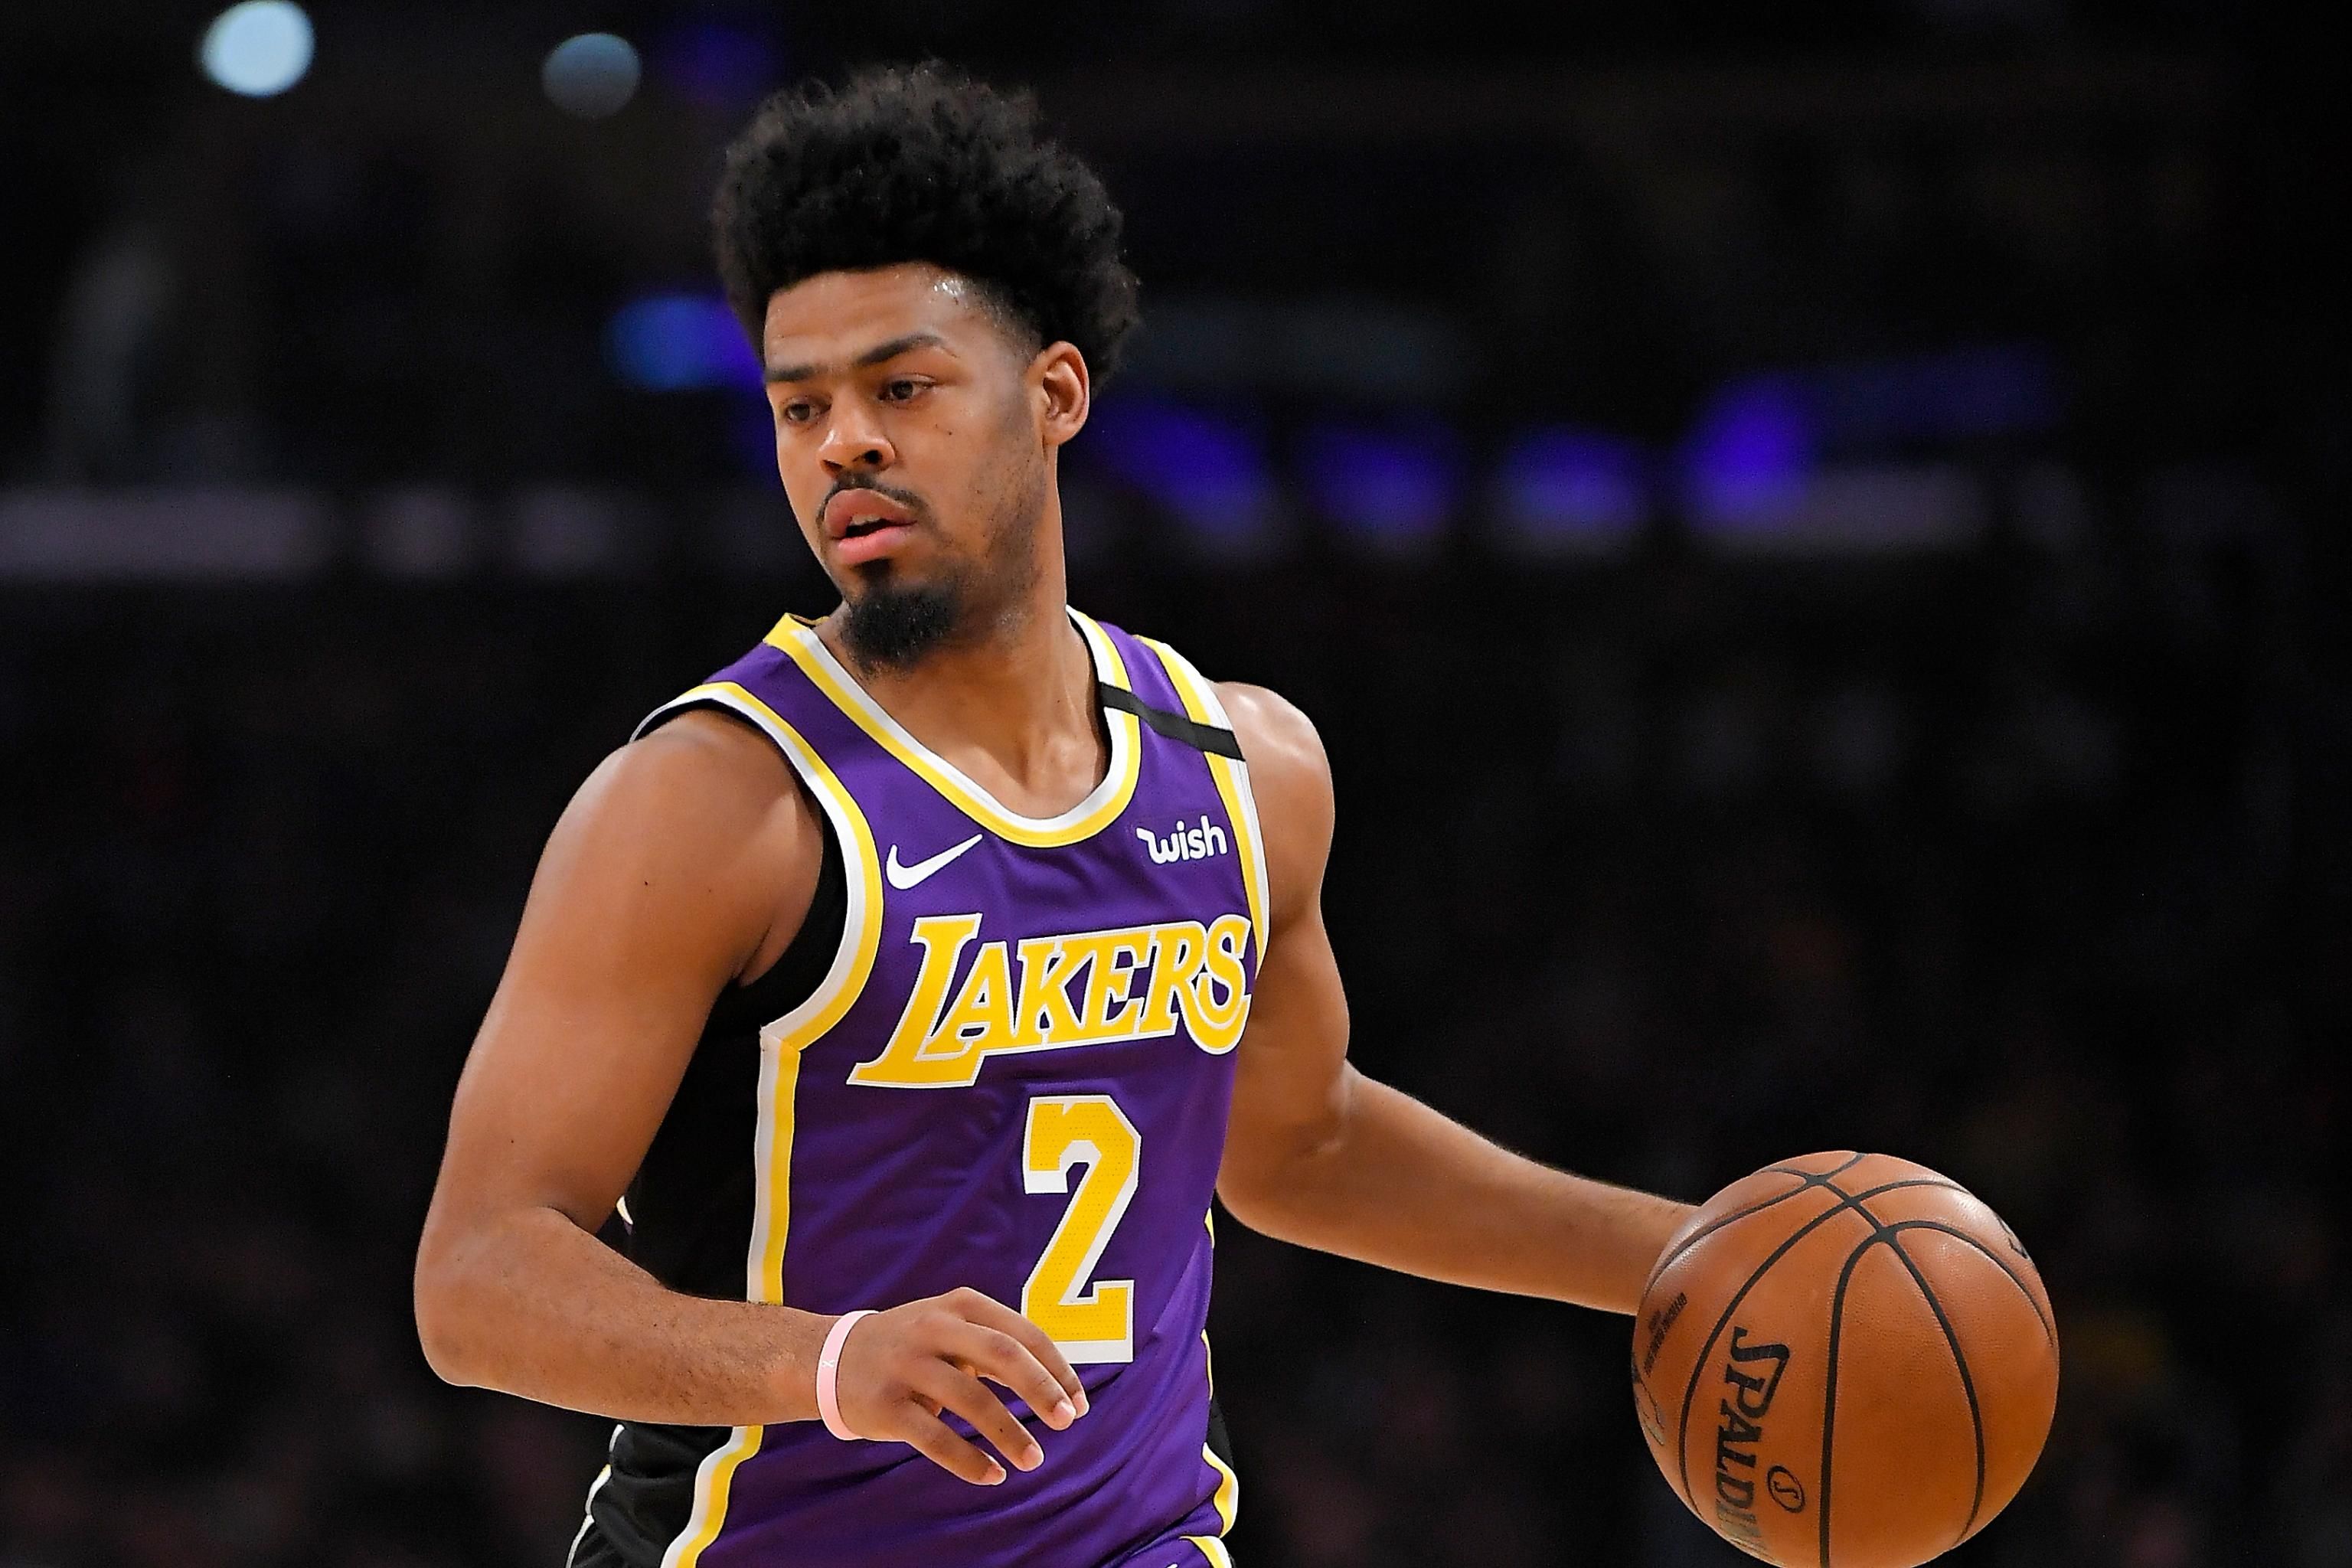 Quinn Cook Changes Lakers' Jersey Number to 28 to Honor Kobe, Gigi